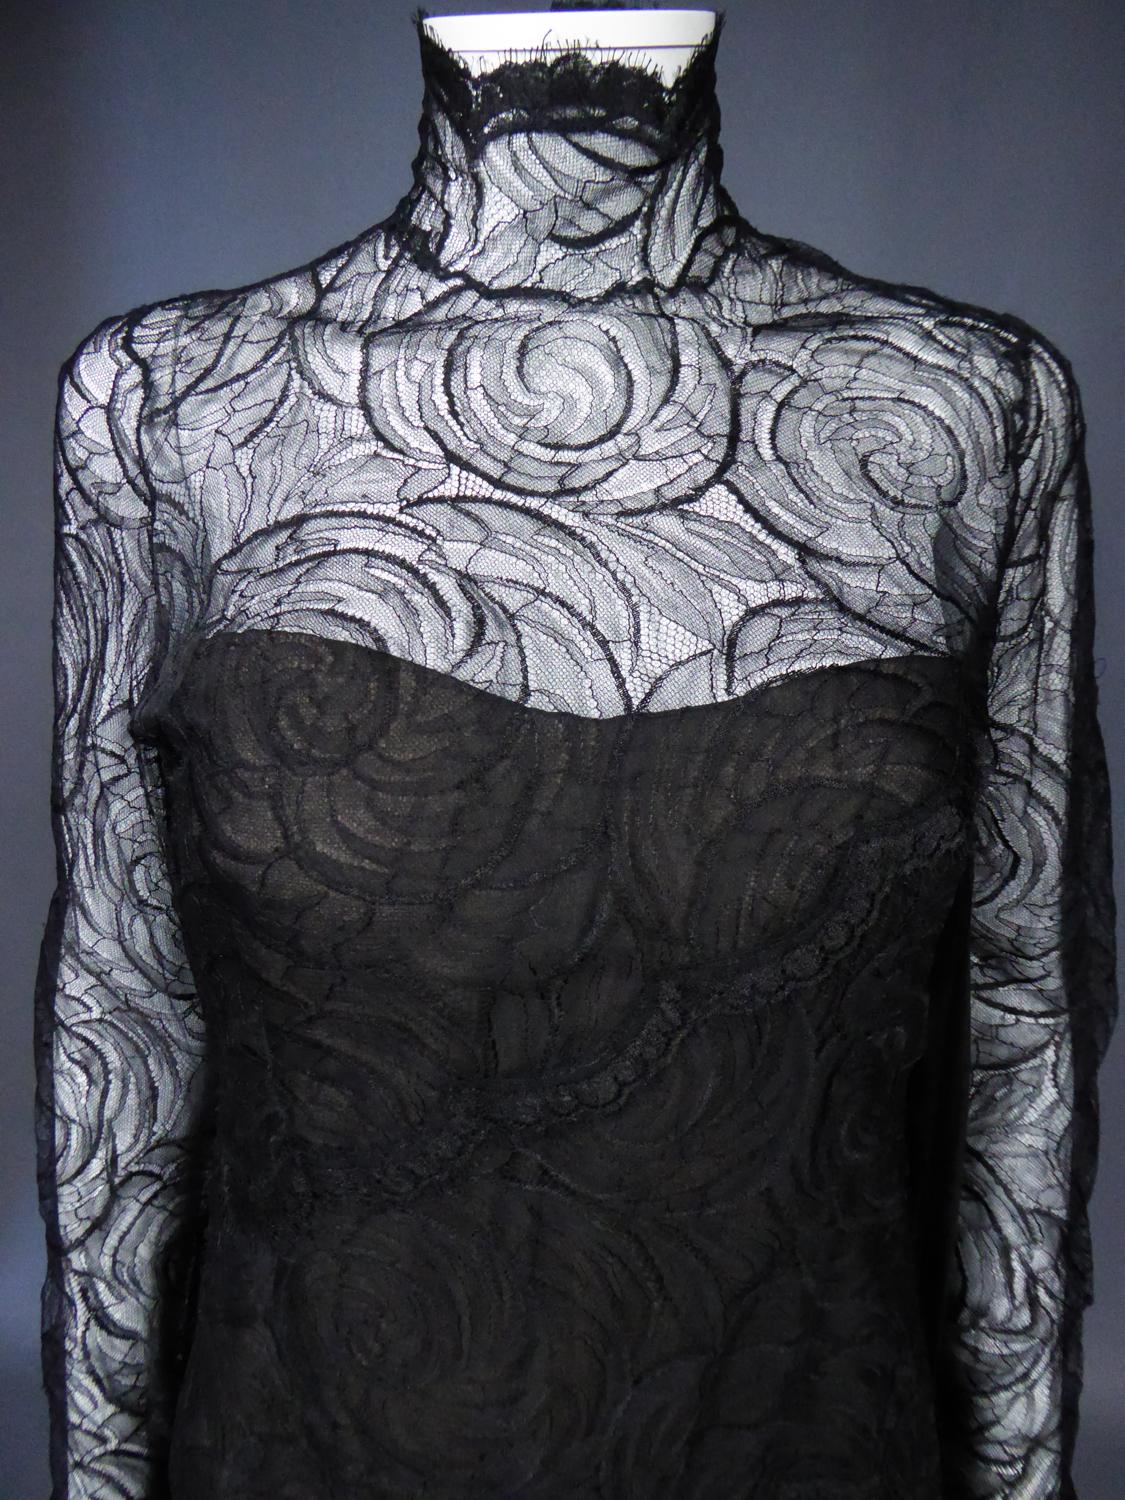 Women's A Chanel Haute Couture Evening Dress by Karl Lagerfeld in Calais Lace Circa 1997